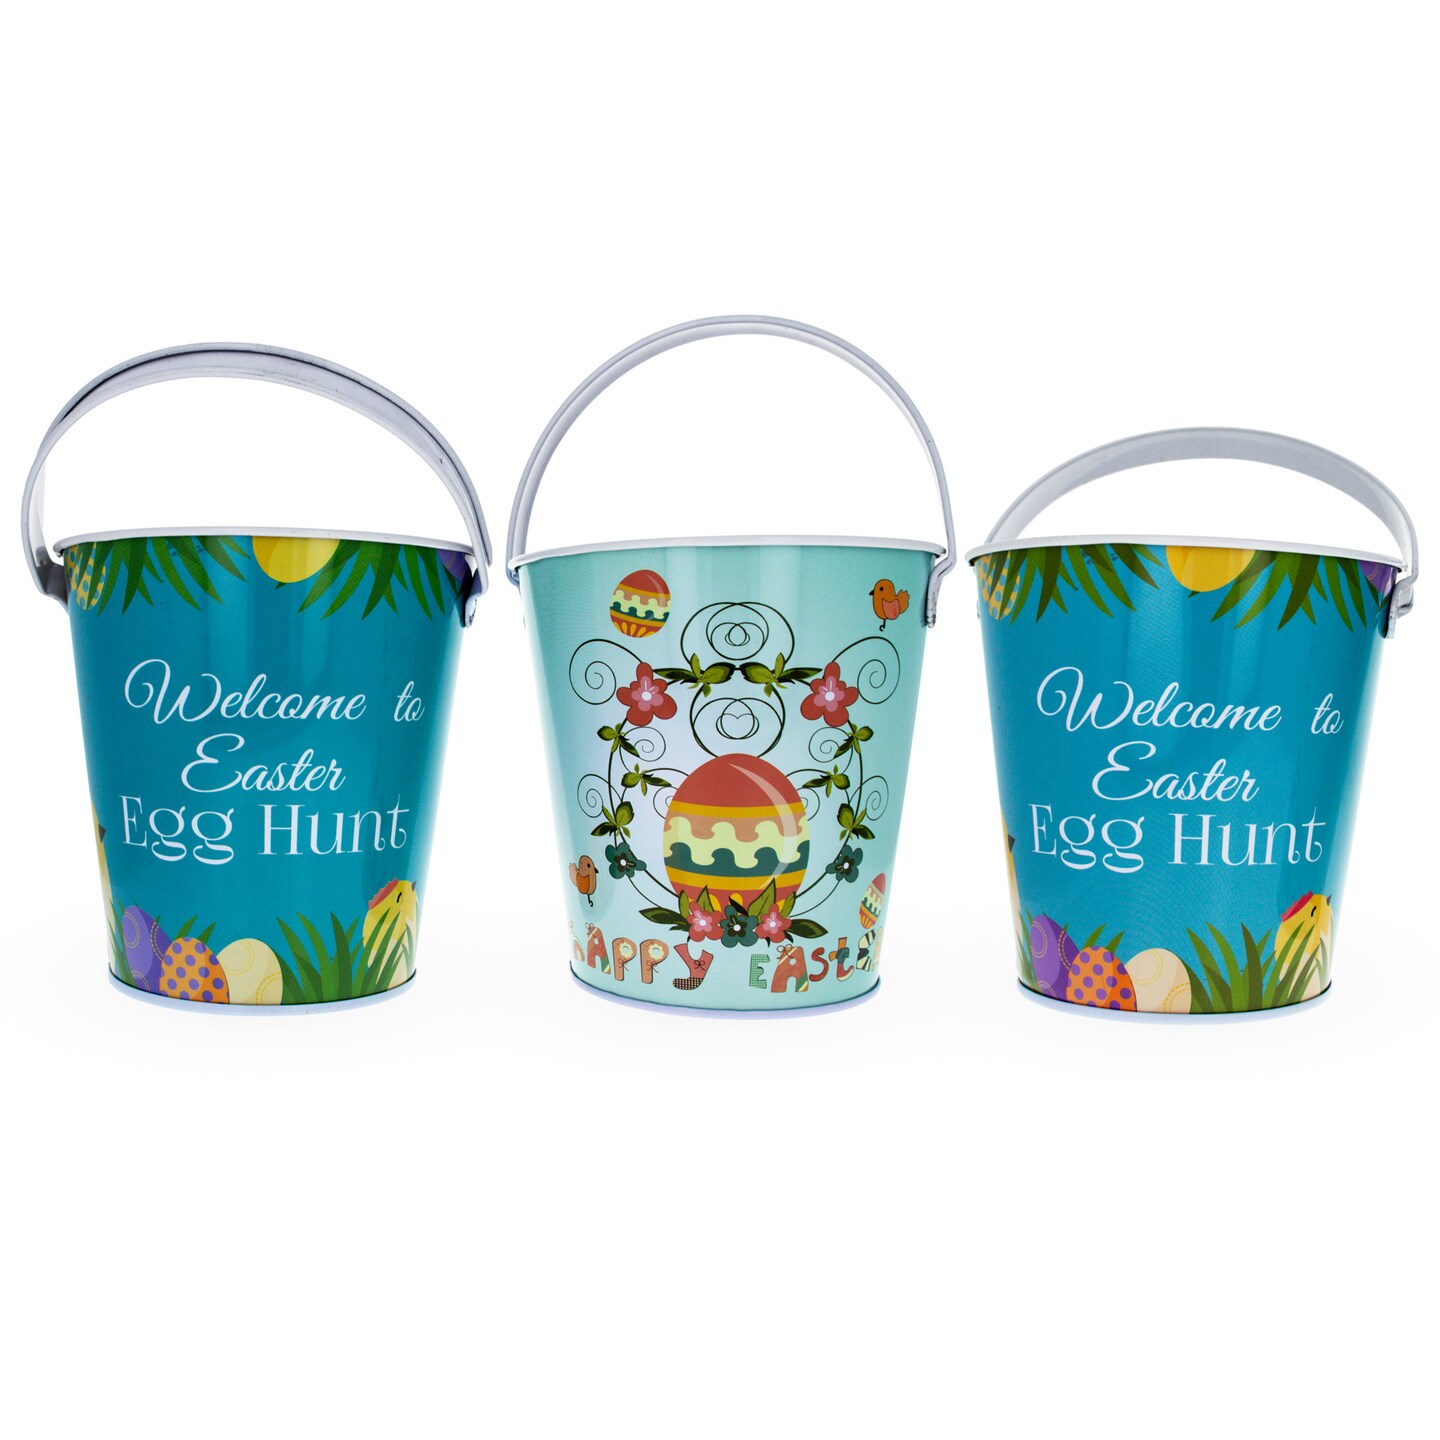 Easter Elegance: Set of 3 Decorative Tin Metal Buckets, Each 6.7 Inches Tall